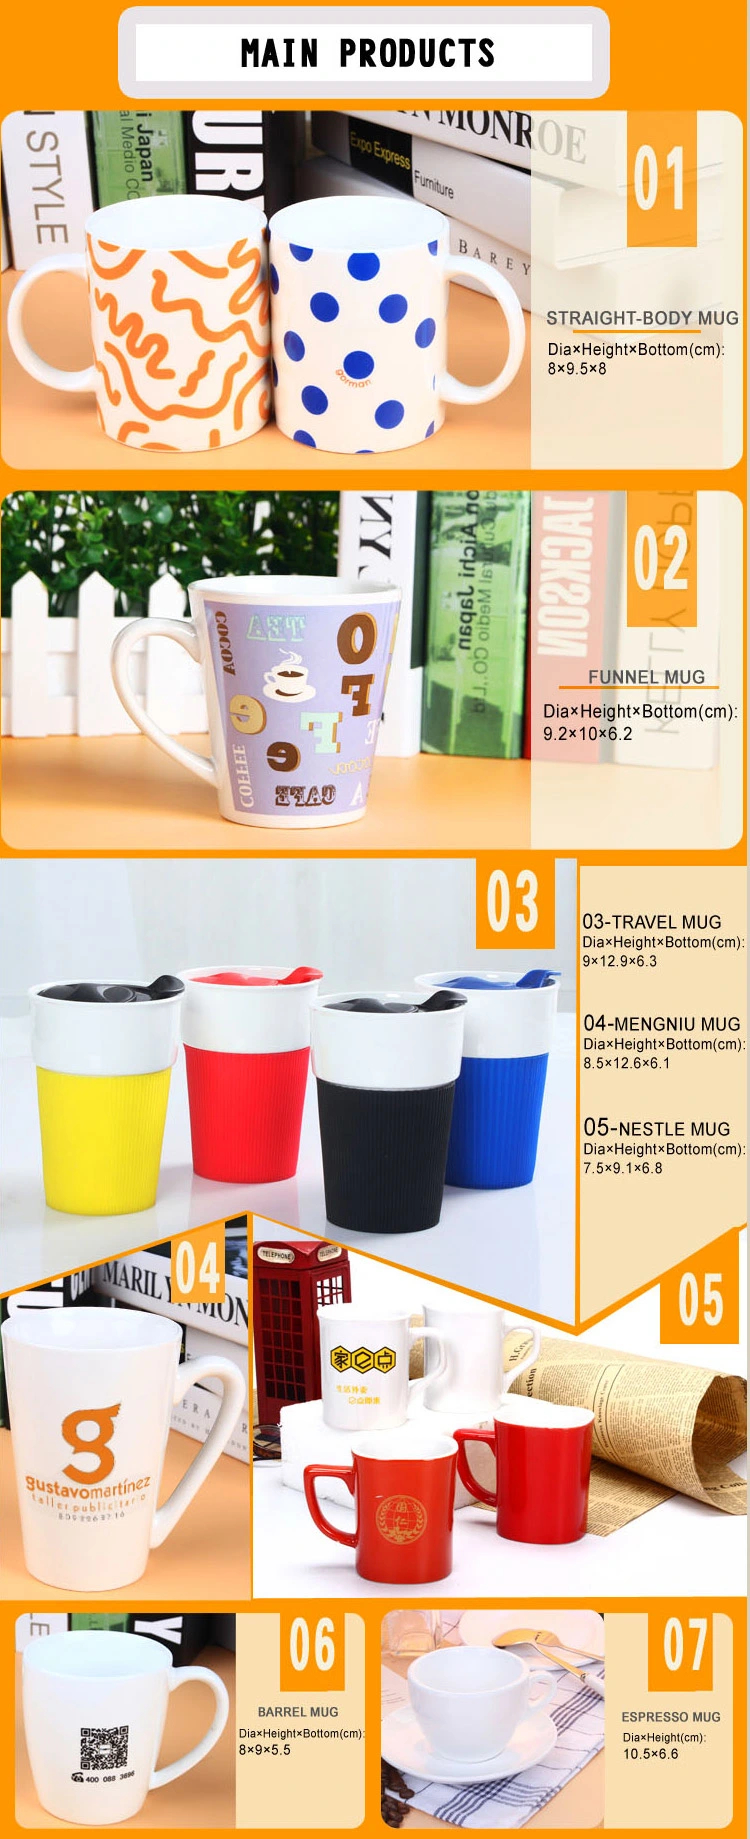 Popular Ceramic Coffee Cup Promotion Small Gift Creative Ceramic Mug Customized Logo Practical Cup Wholesale